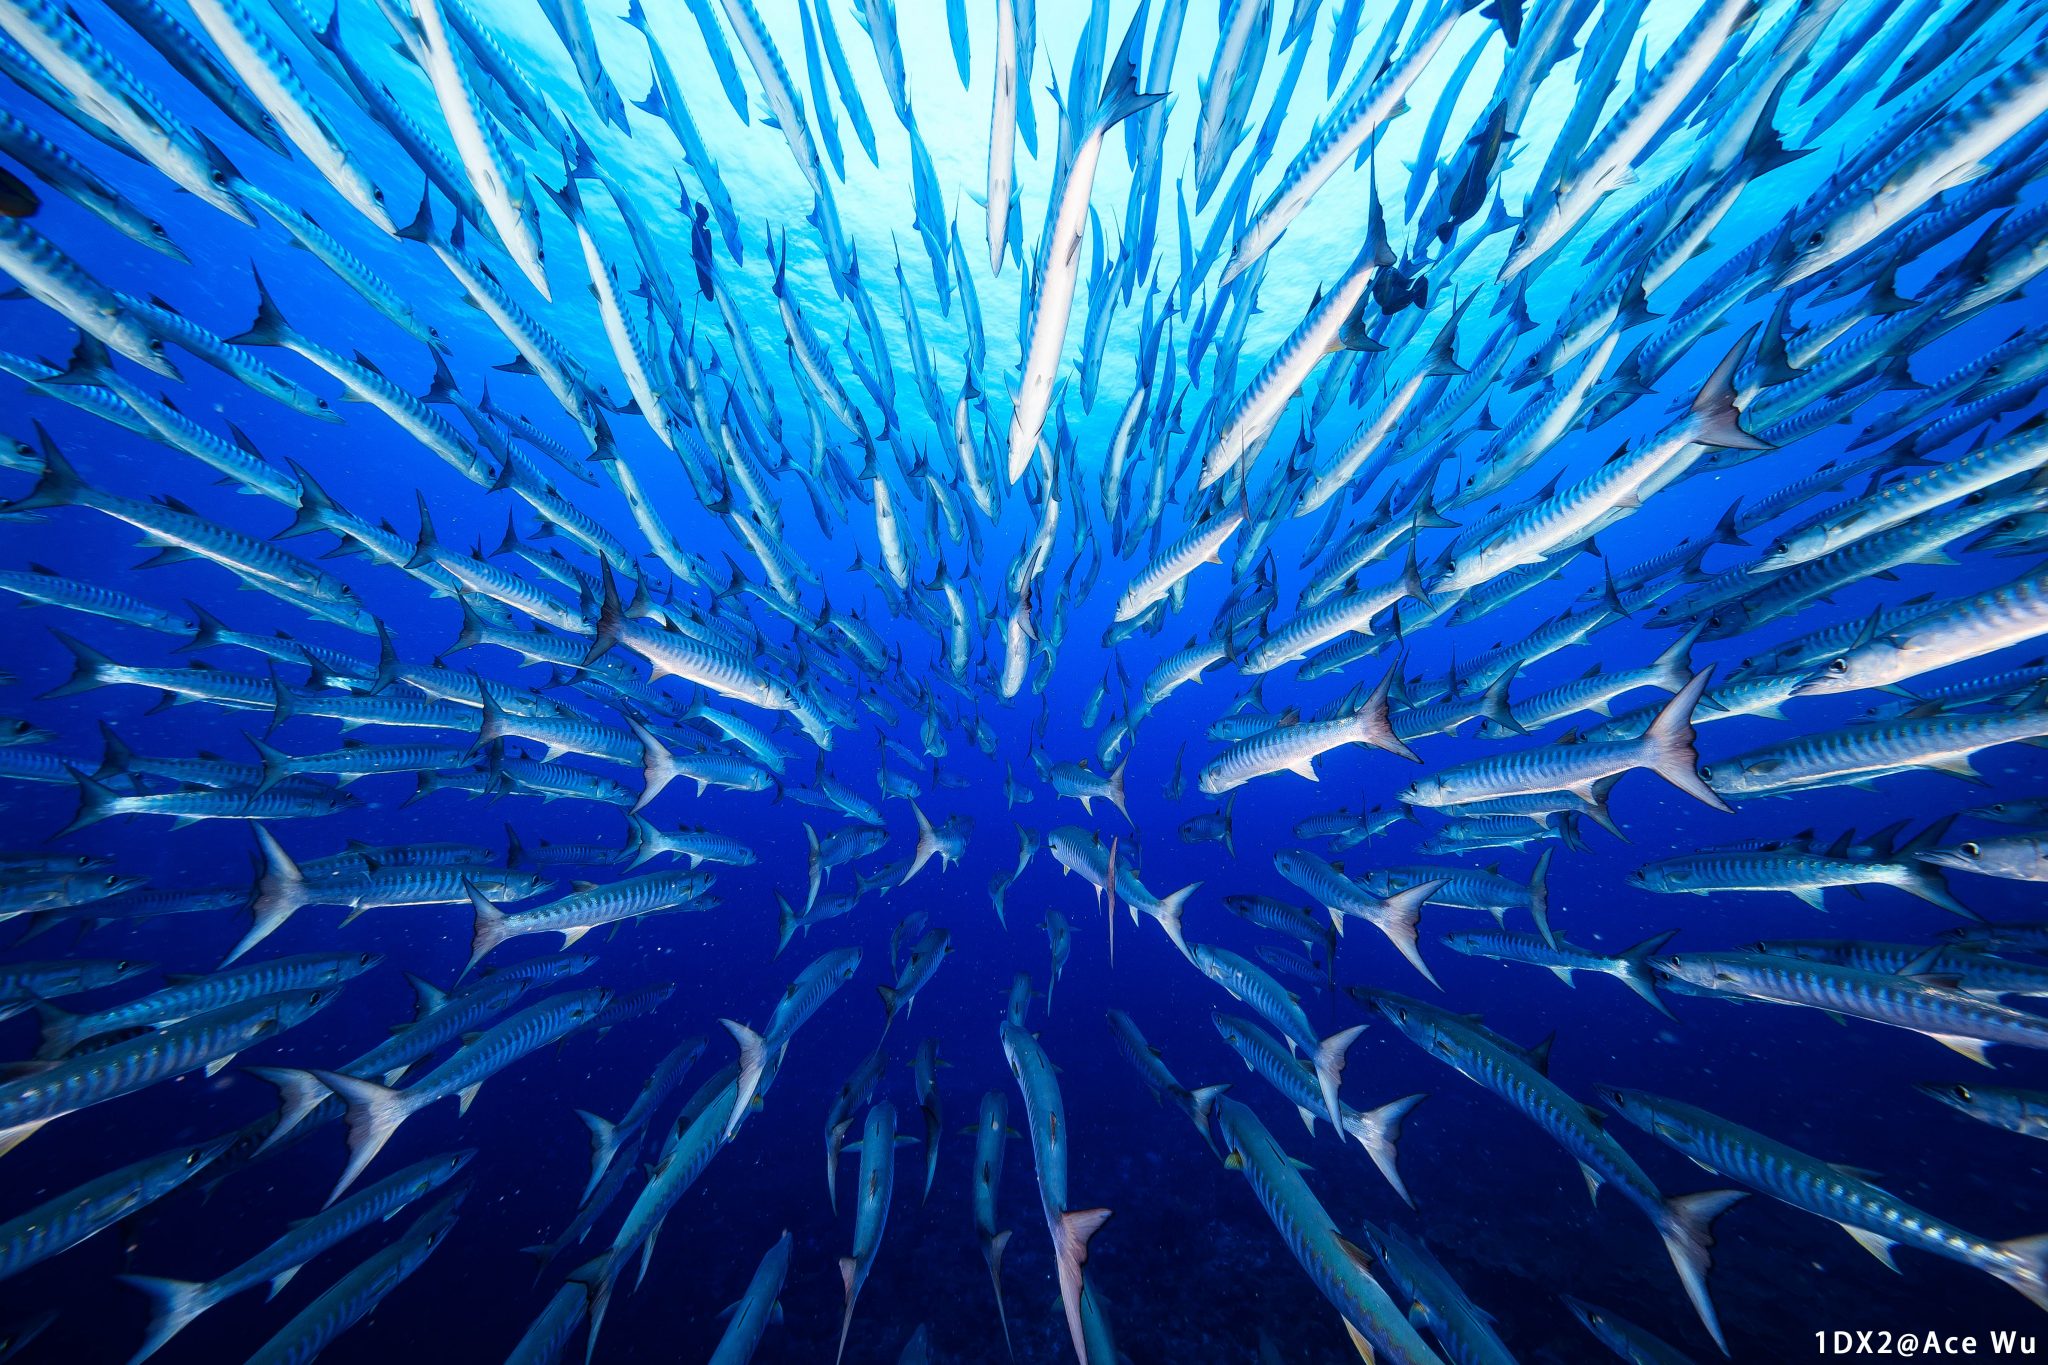 A first hand look inside a school of fish in motion